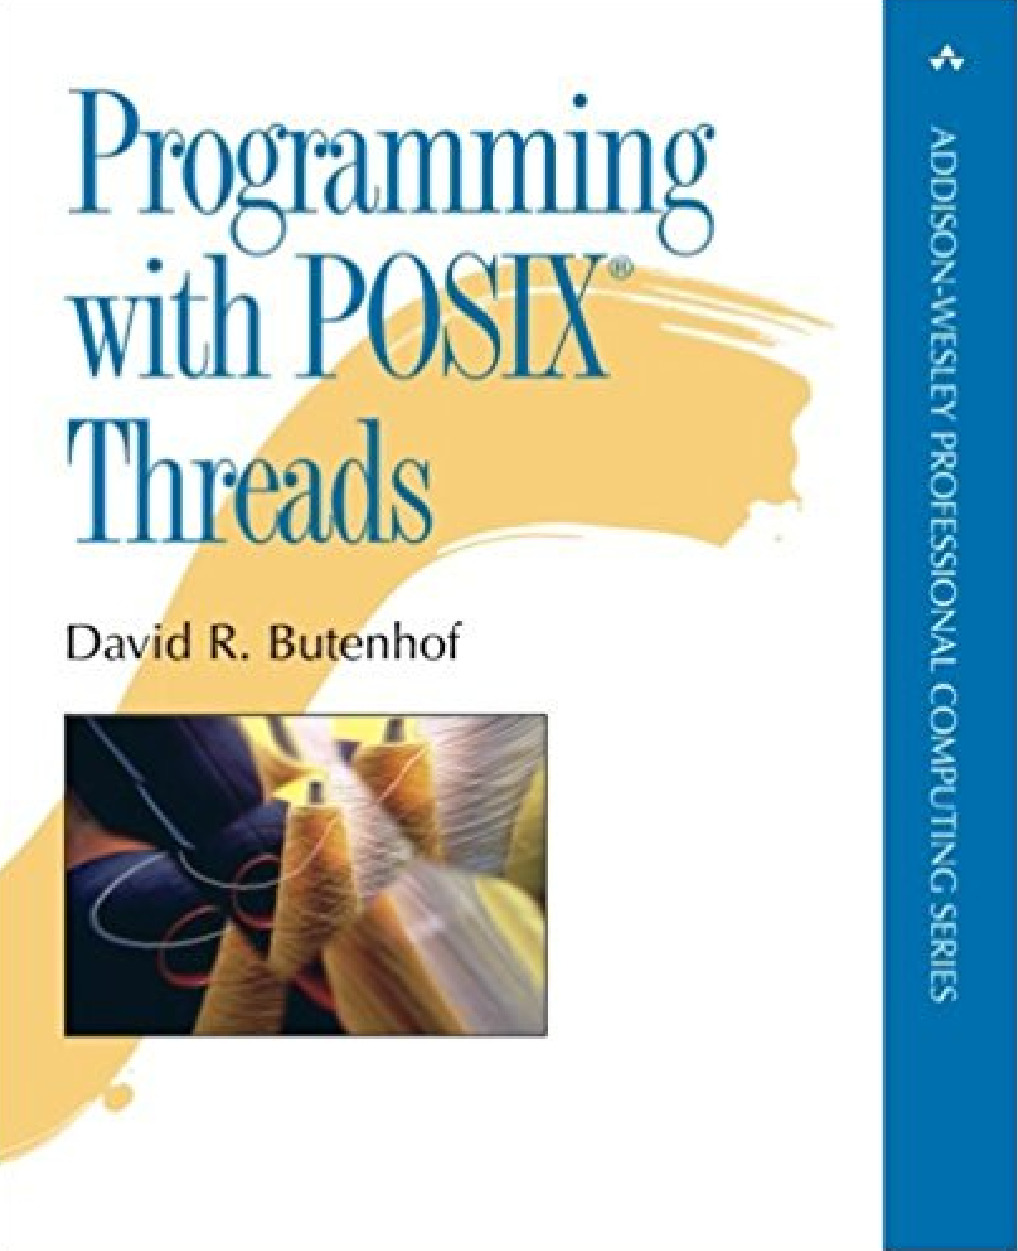 Programming with POSIX threads ( PDFDrive )